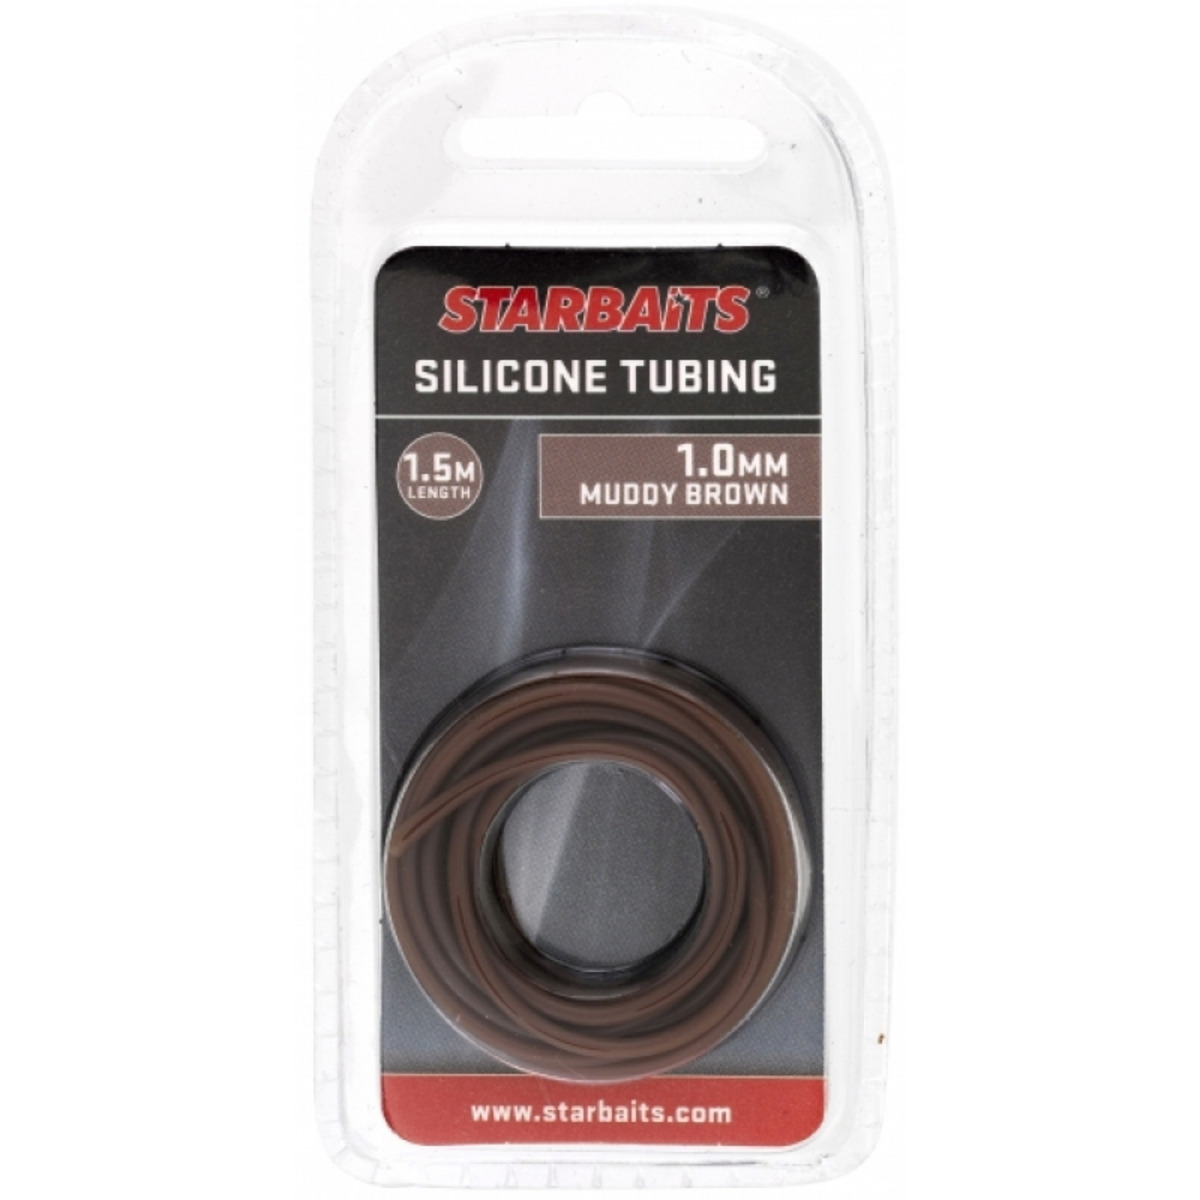 Starbaits Silicone Tubing 1.0mm - MUDDY BROWN